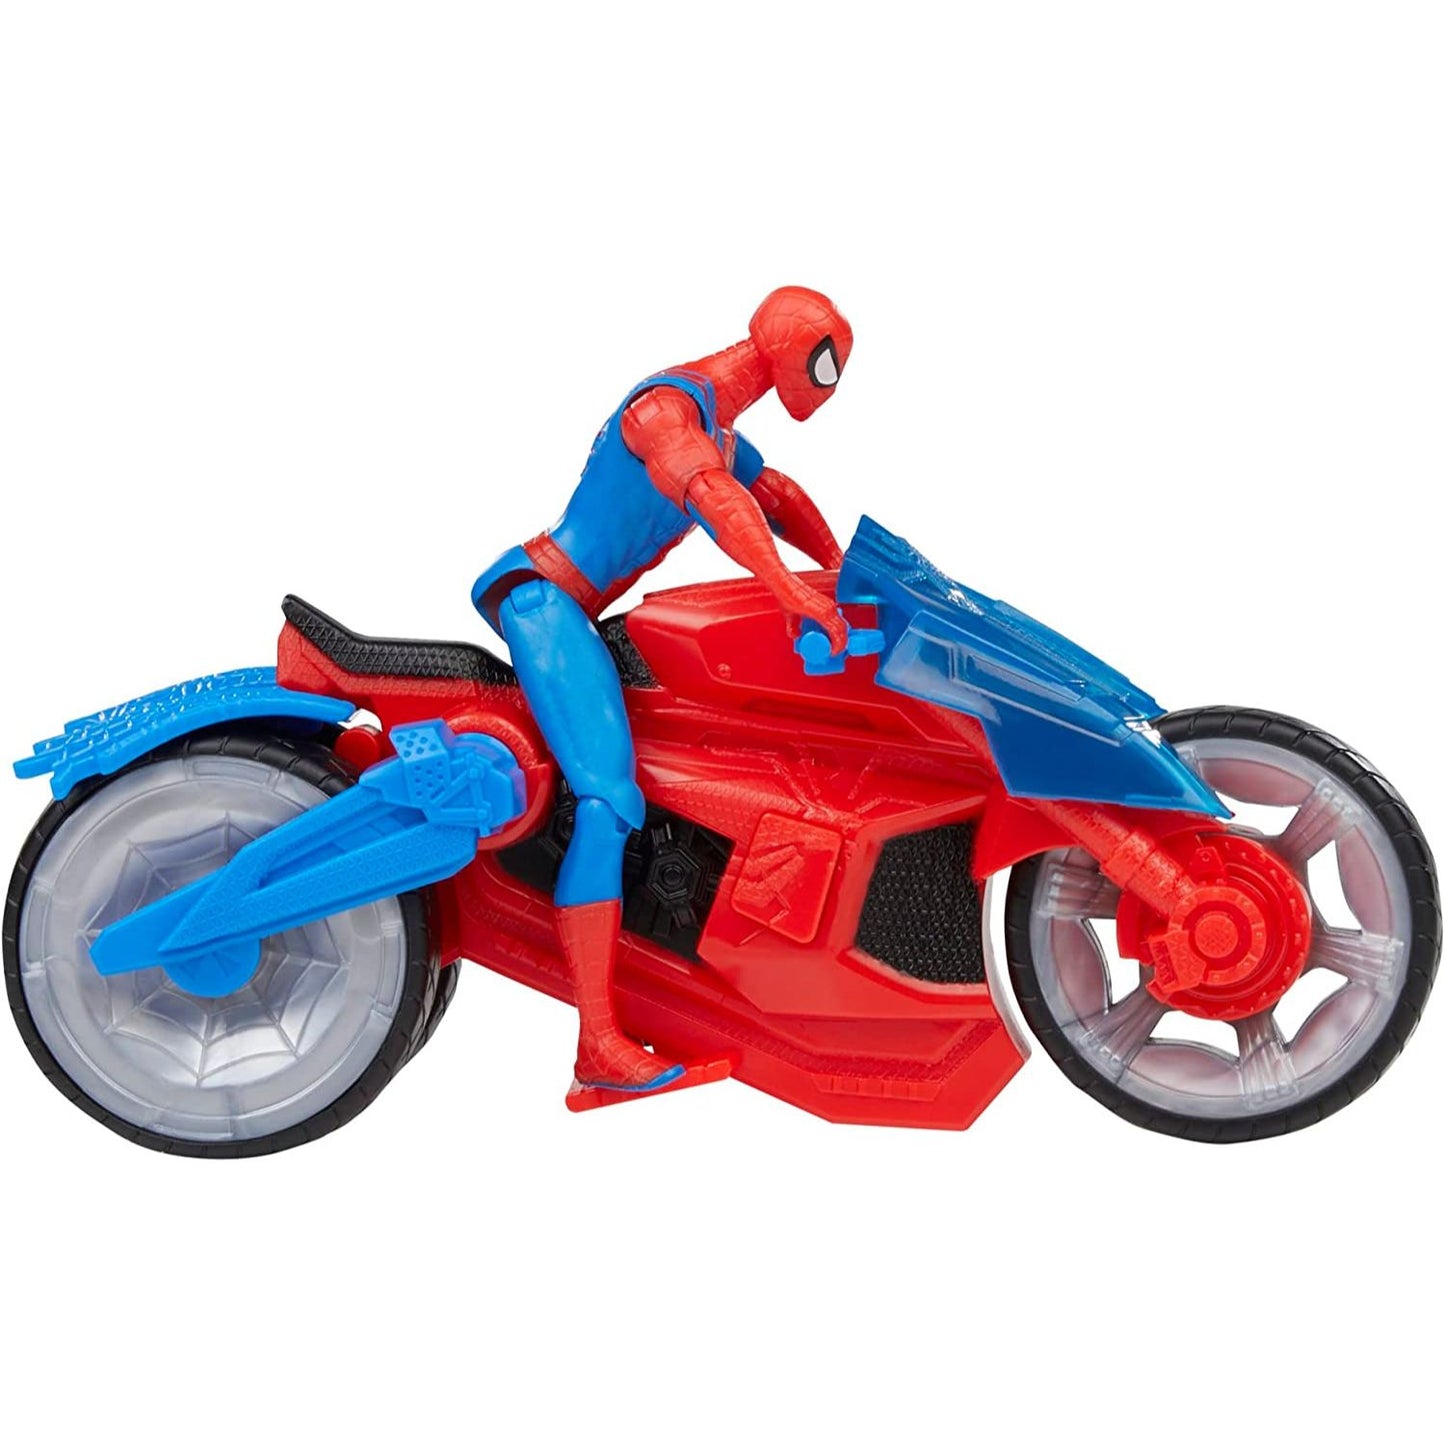 Marvel Spider-Man 4 Inch Action Figure & Vehicle Toy Epic Hero Series